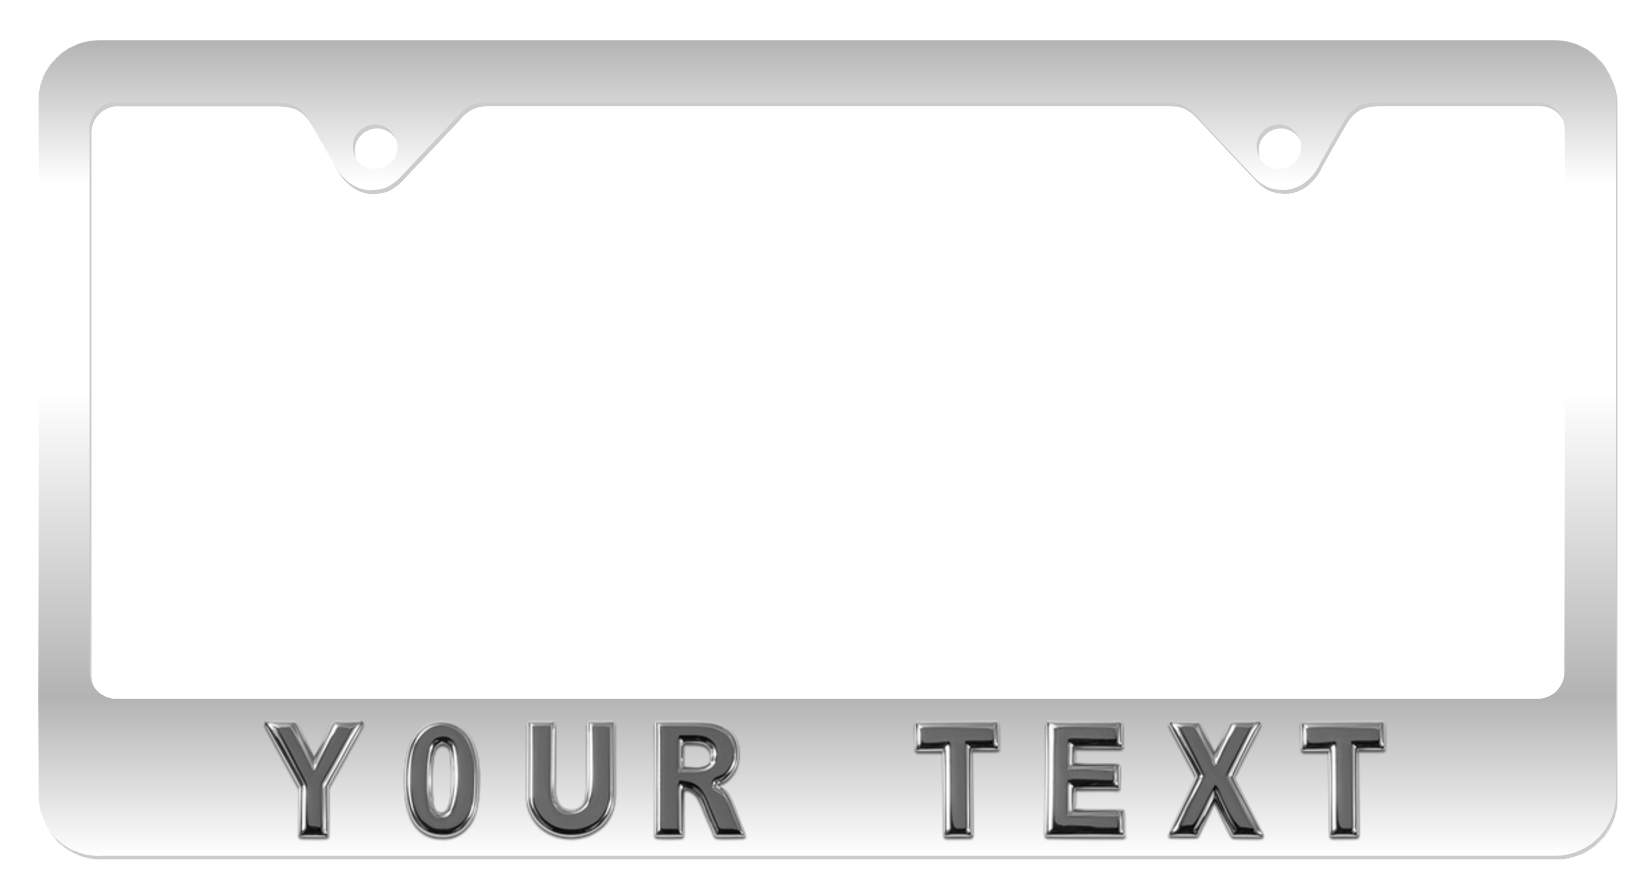 Personalize Your Own License Plate Frame